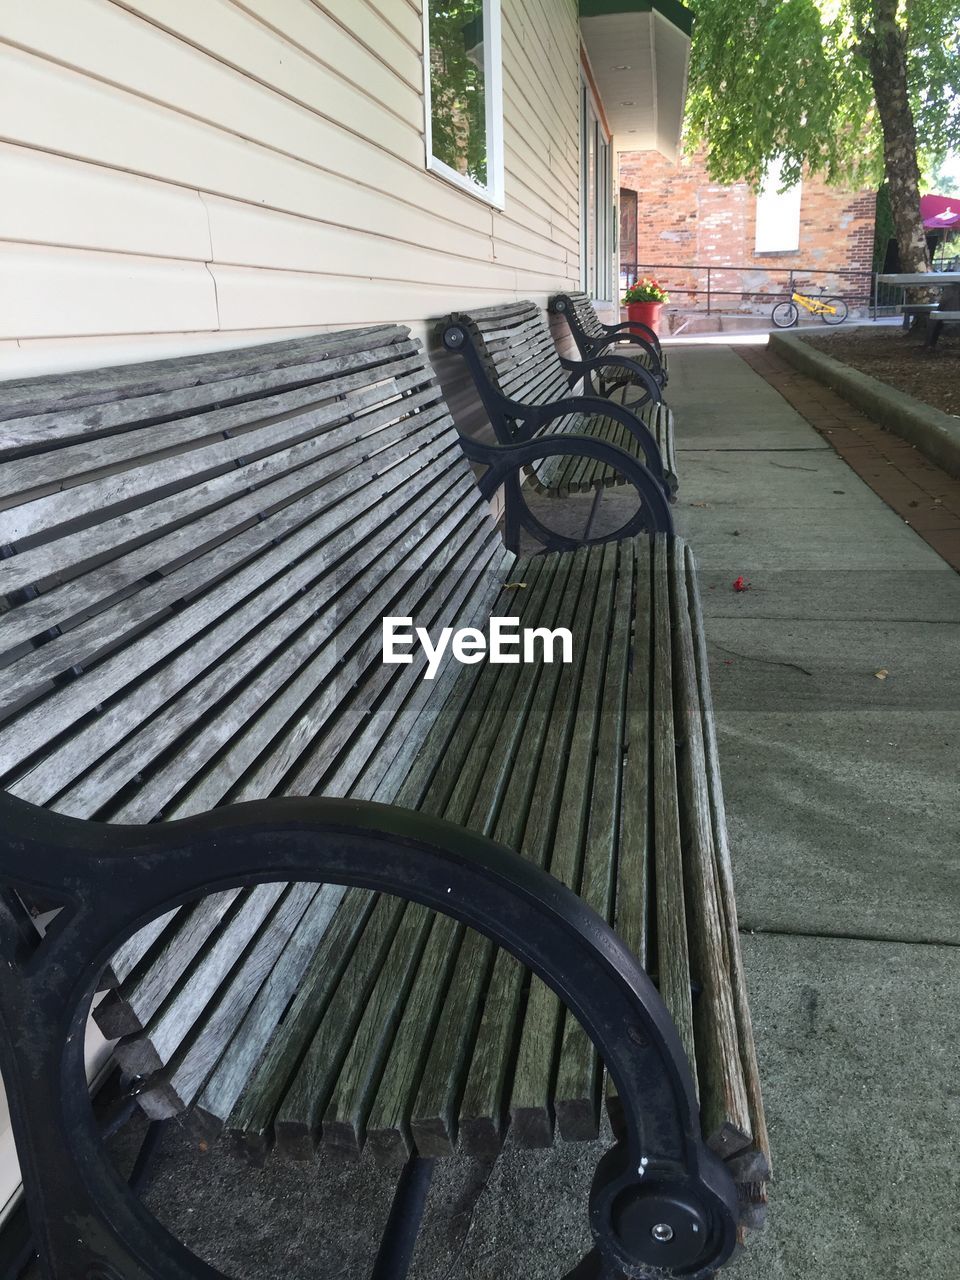 CLOSE-UP OF BICYCLE PARKED IN FRONT OF EMPTY BENCH